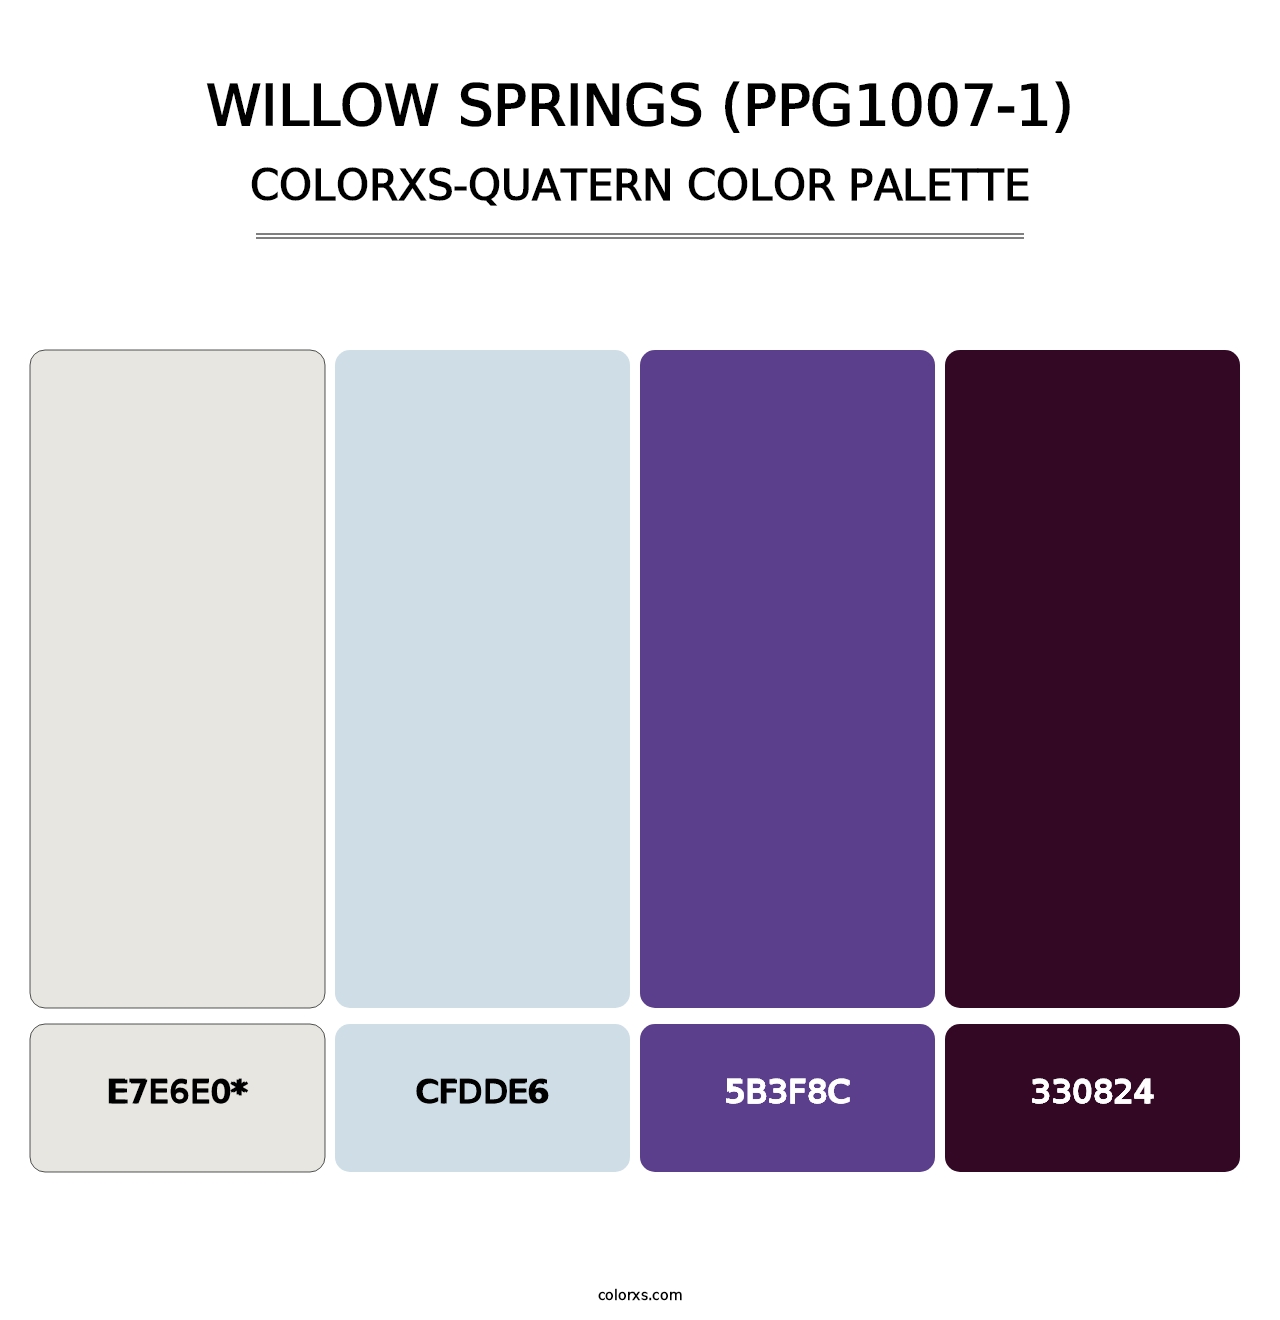 Willow Springs (PPG1007-1) - Colorxs Quatern Palette